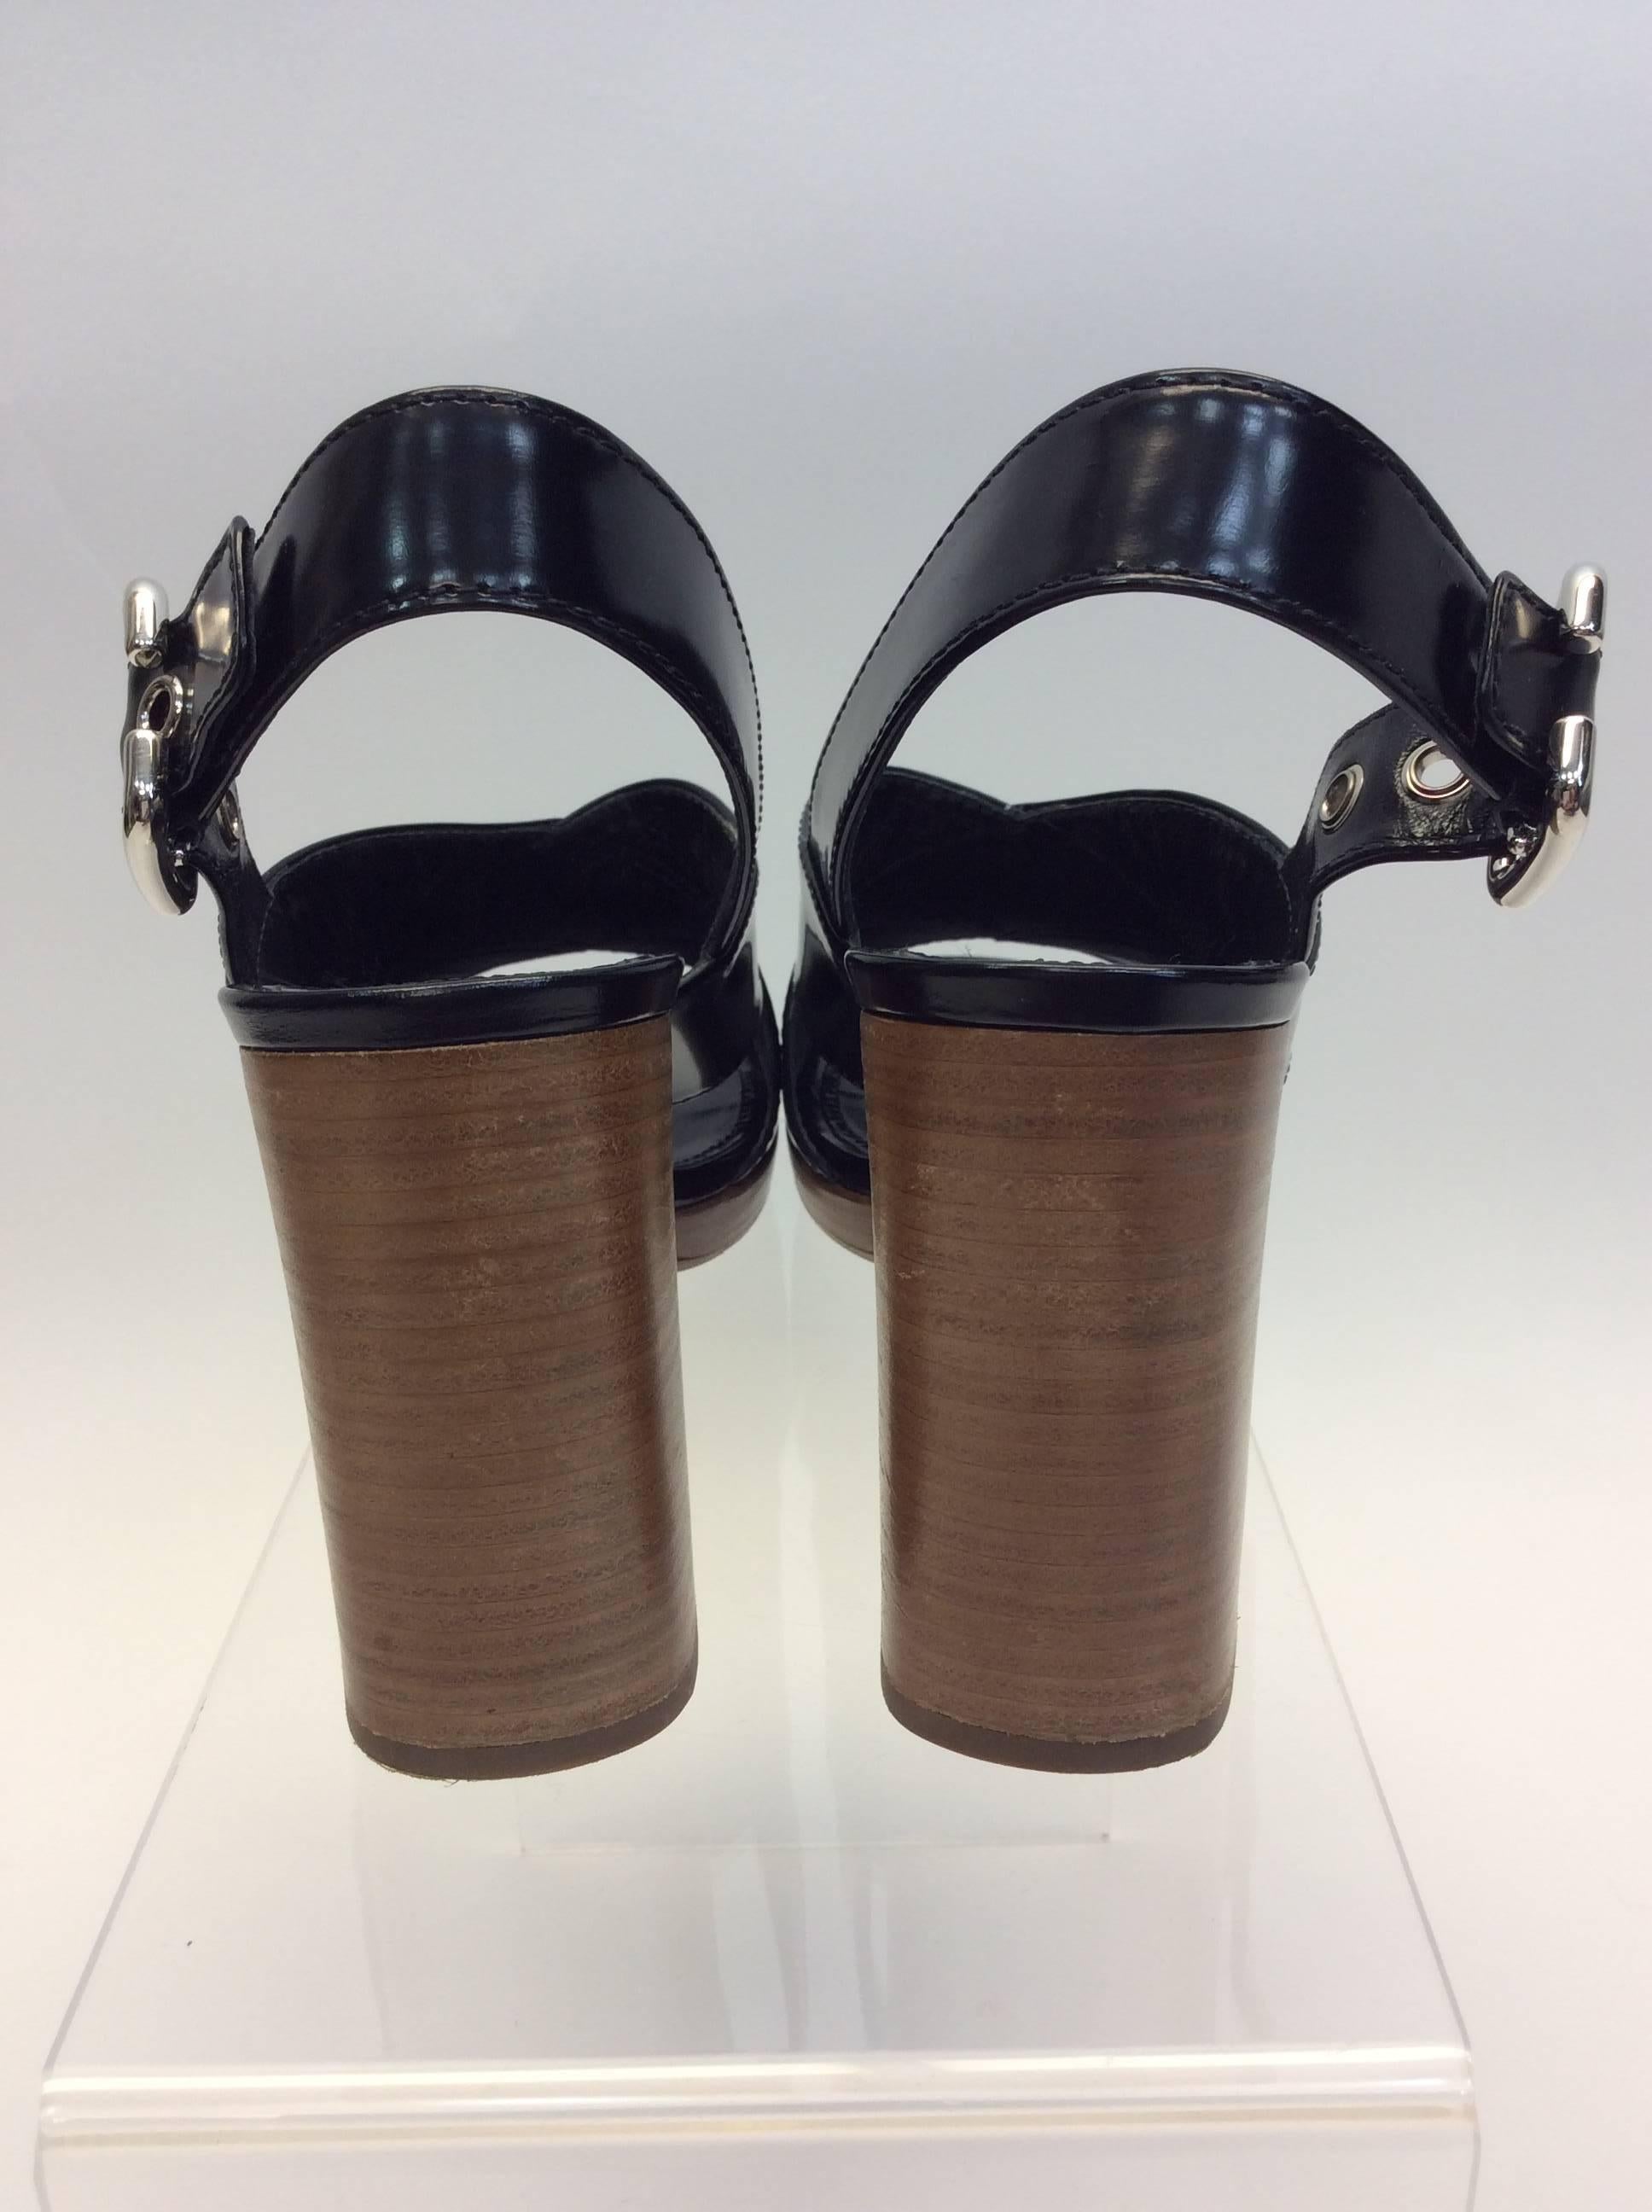 Prada Black Leather Heeled Sandal In Excellent Condition For Sale In Narberth, PA